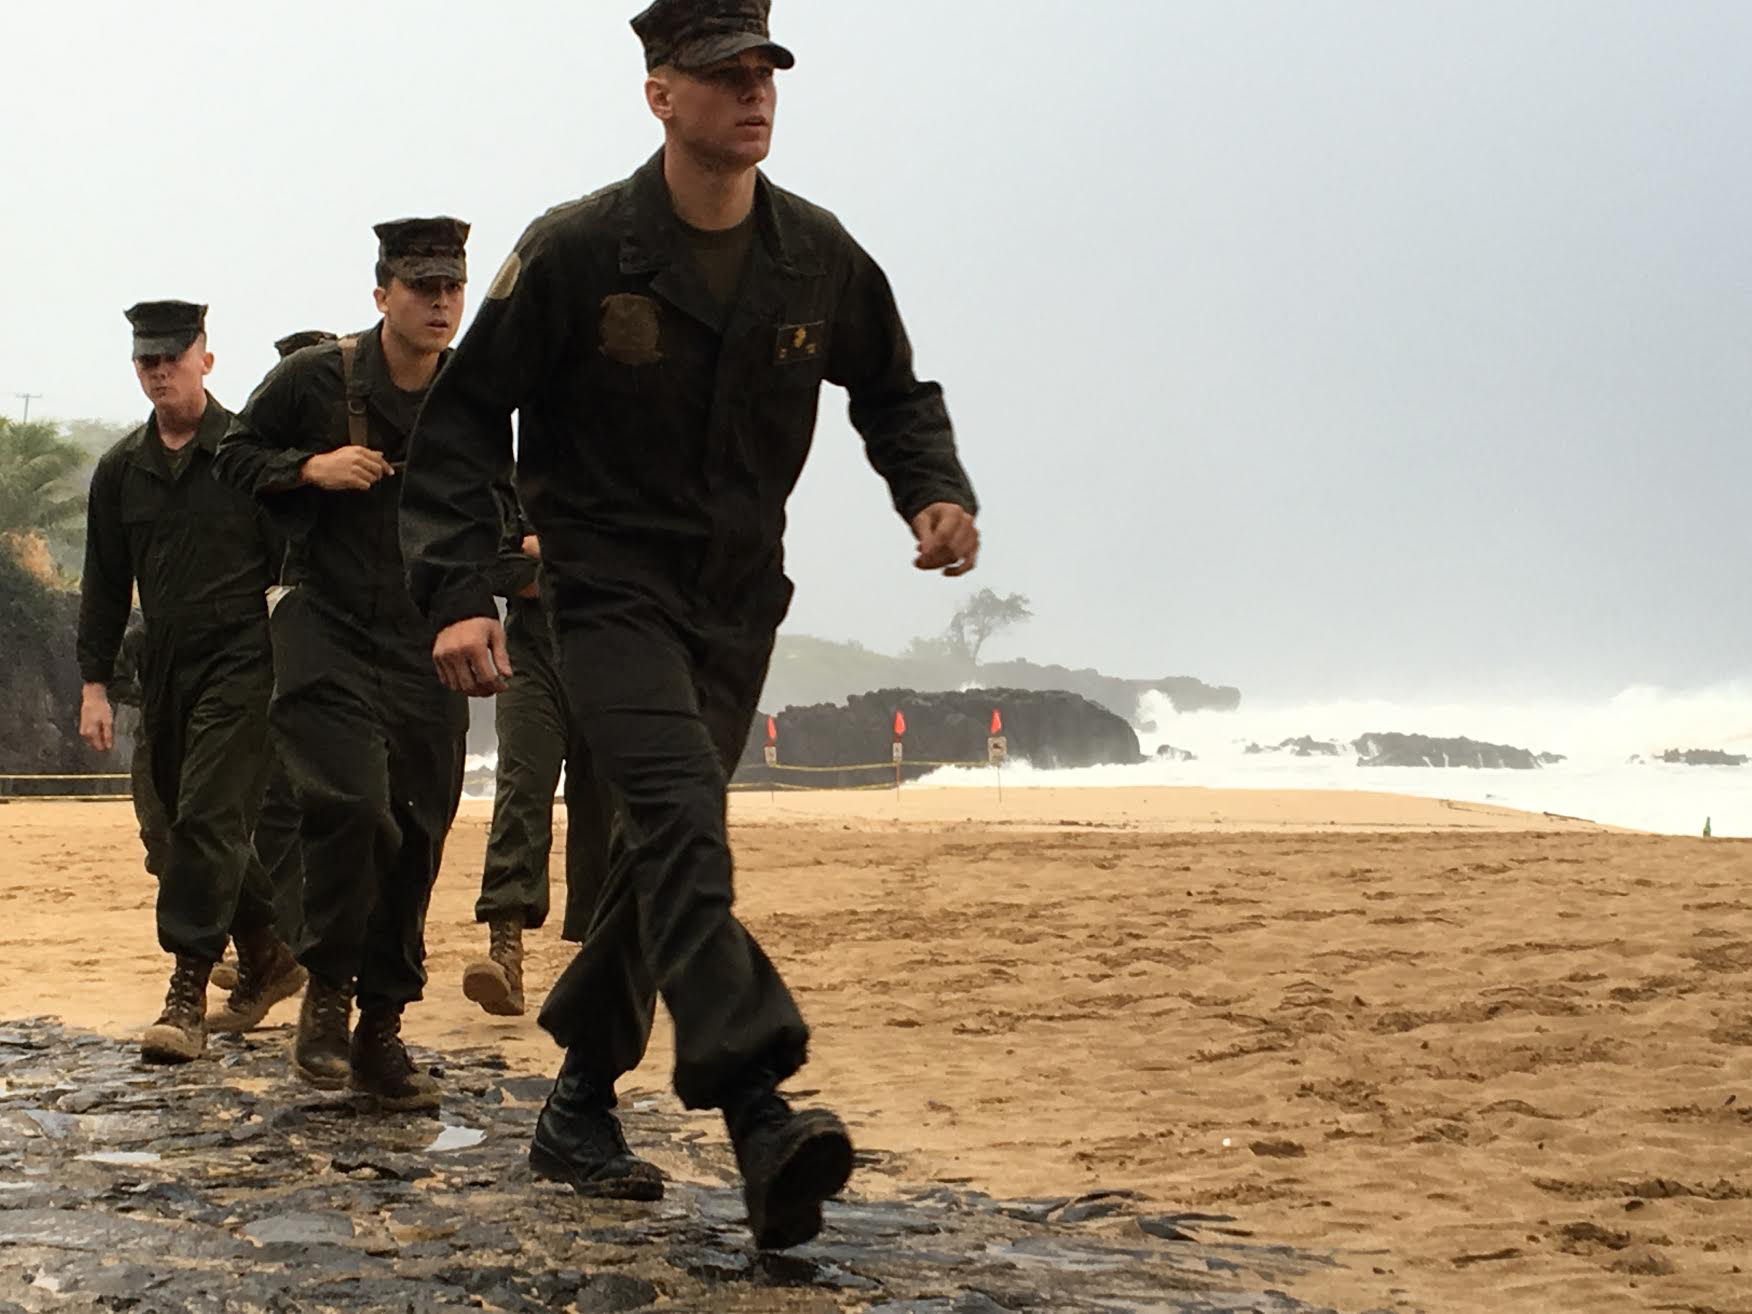 U.S. Marines walk on the beach at Waimea Bay near Haleiwa, Hawaii, where two military helicopters crashed into the ocean about 2 miles offshore, Friday, Jan. 15, 2106. The helicopters carrying 12 crew members collided off the Hawaiian island of Oahu during a nighttime training mission, and rescuers are searching a debris field in choppy waters Friday, military officials said. (Mariana Keller via AP Photo)